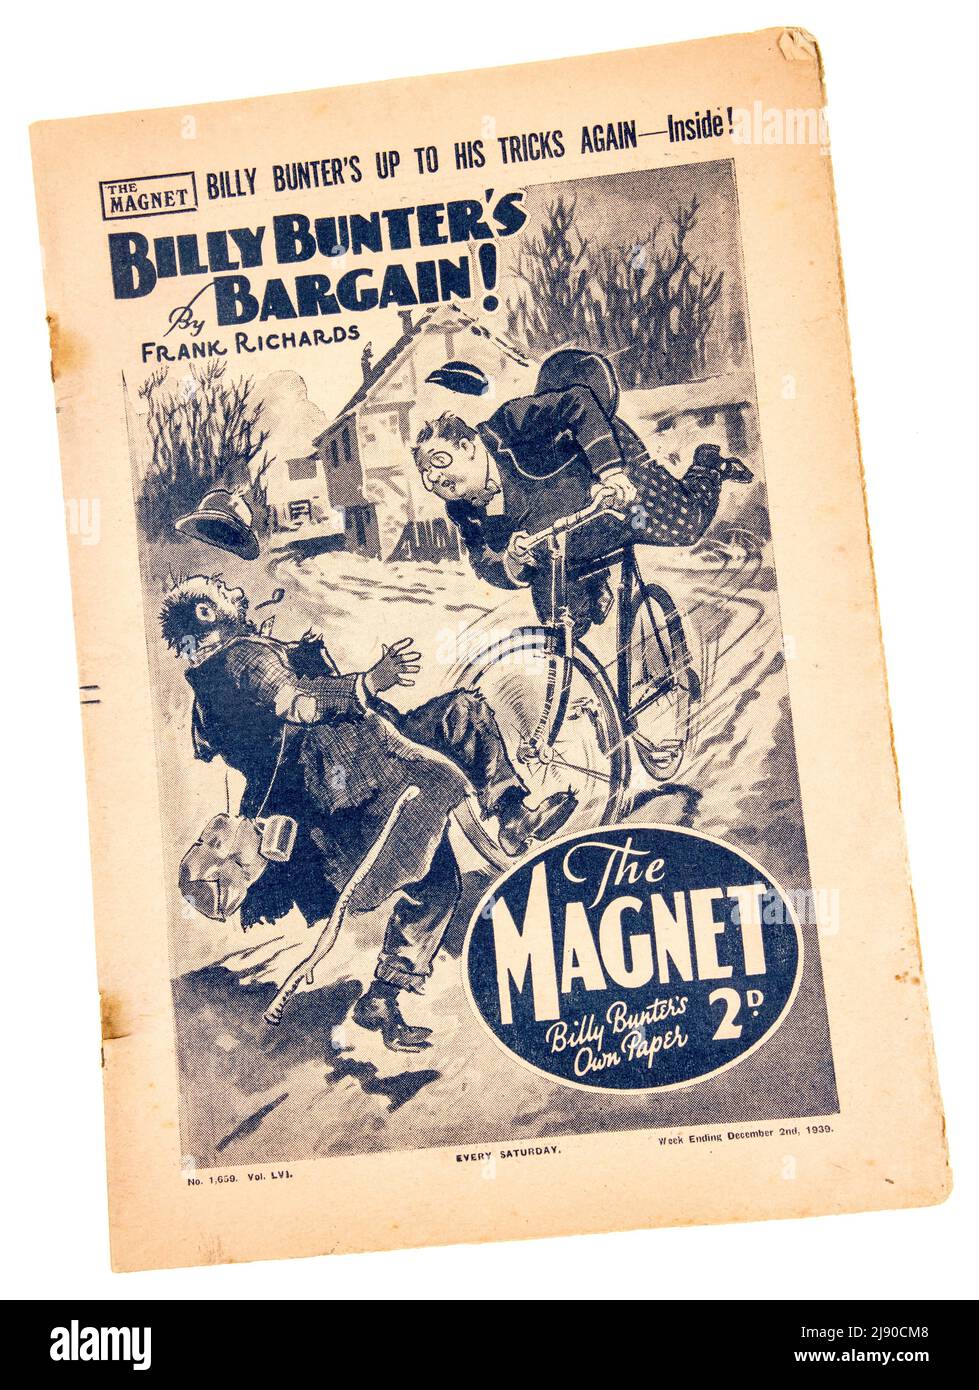 The Magnet, boys' comic featuring Billy Bunter and story by Frank Richards for 2 December 1939 with discoloured wartime poor quality paper Stock Photo